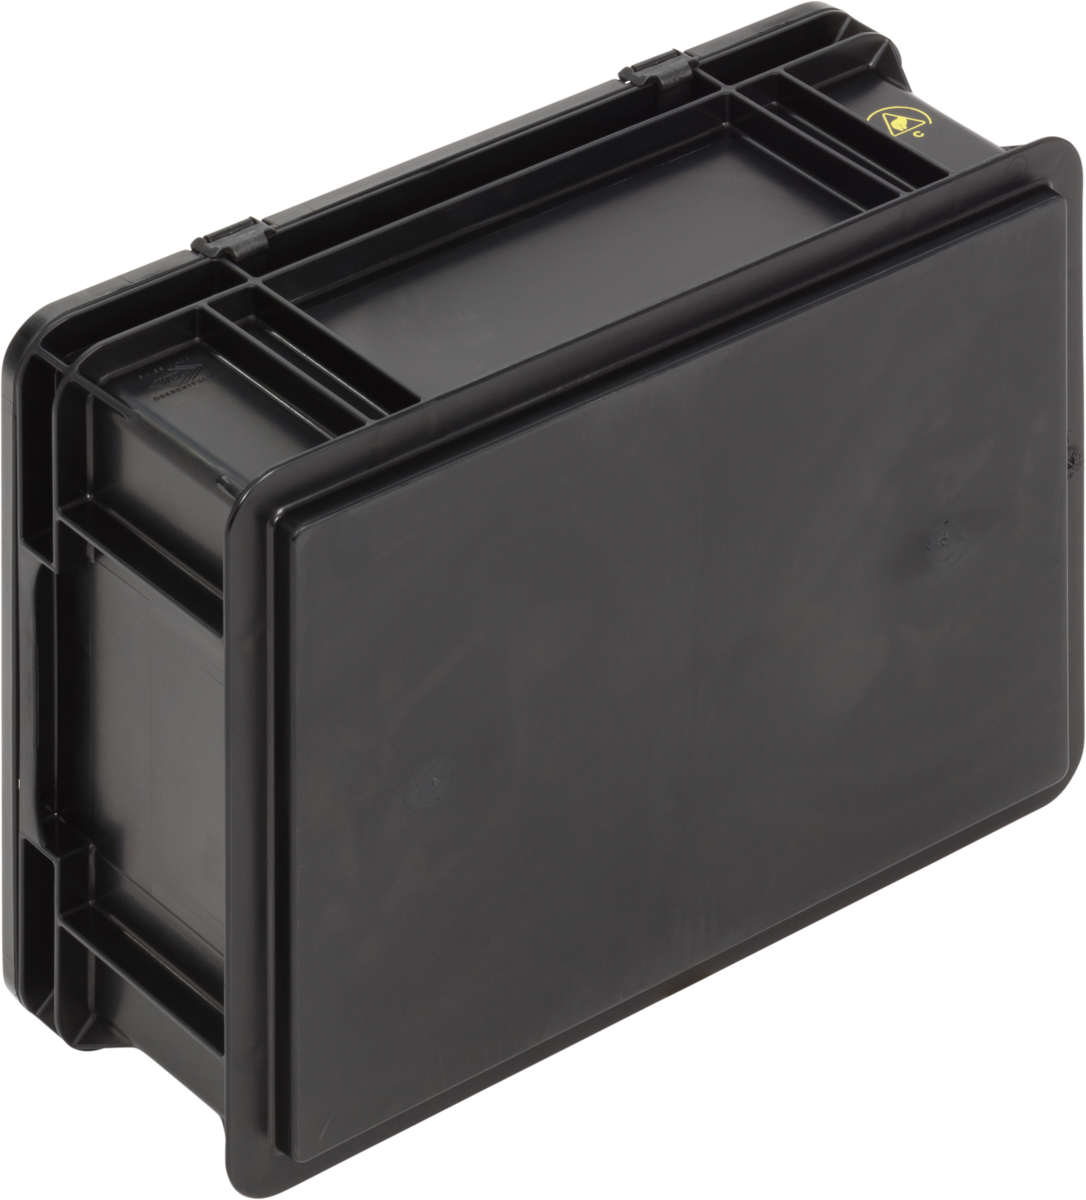 ESD-Safe-SGL-Norm-Carrying-Cases-Flat-Base-007-Ref.-4313.397.992_1004381_400x300x154_02